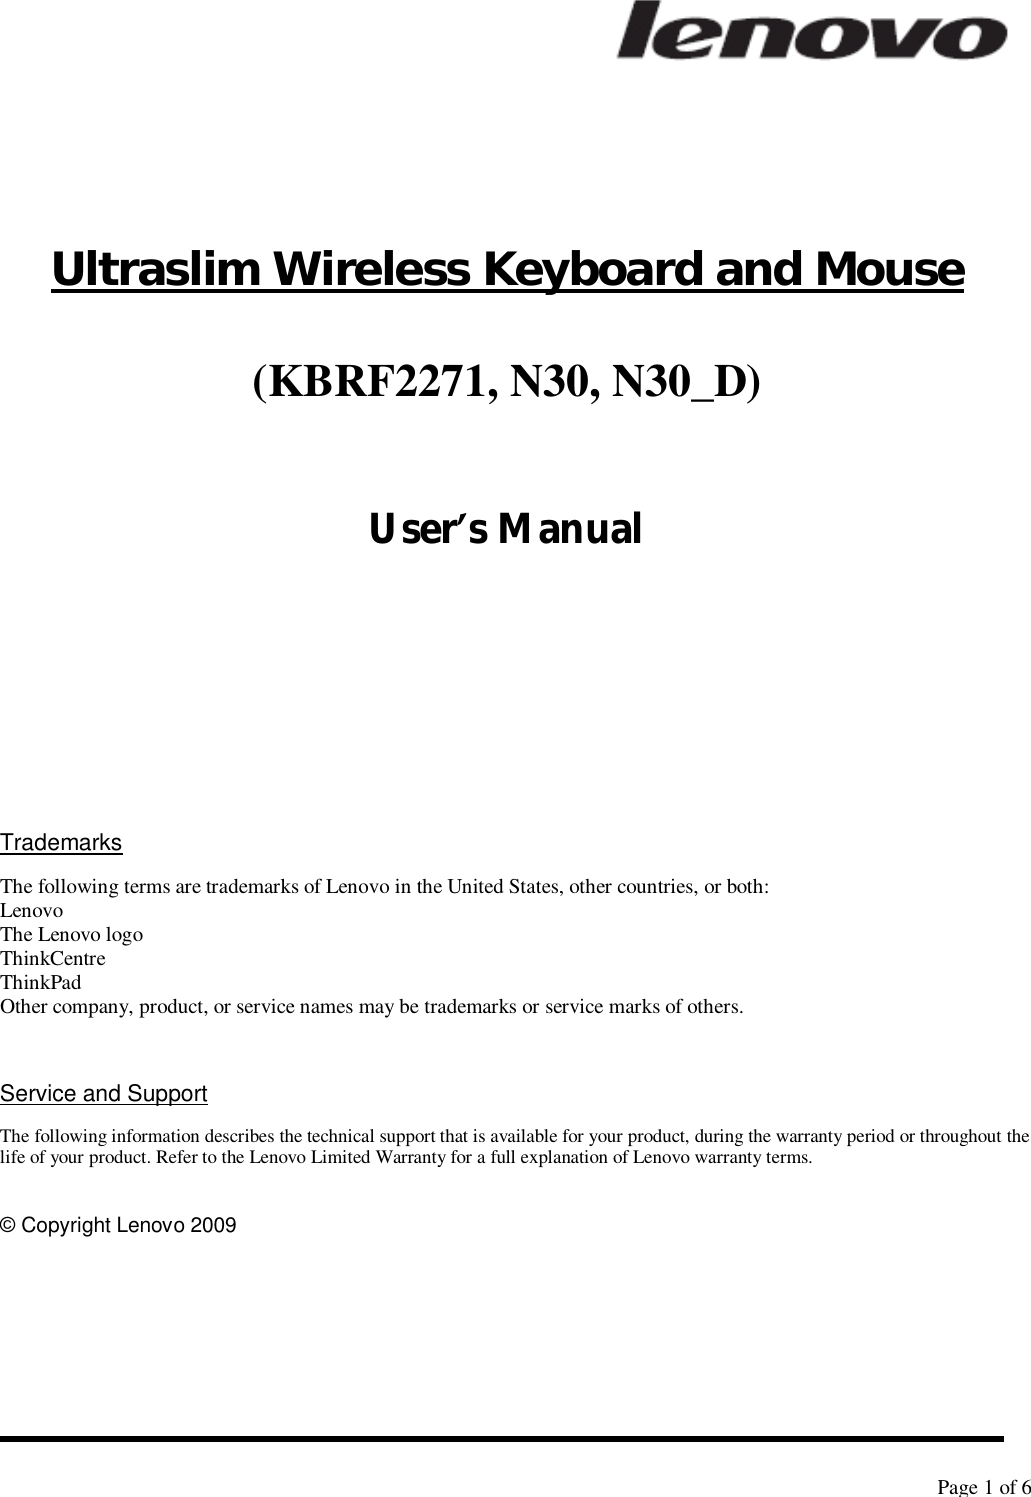   Page 1 of 6      Ultraslim Wireless Keyboard and Mouse (KBRF2271, N30, N30_D)  User’s Manual       Trademarks The following terms are trademarks of Lenovo in the United States, other countries, or both: Lenovo The Lenovo logo ThinkCentre ThinkPad Other company, product, or service names may be trademarks or service marks of others.   Service and Support The following information describes the technical support that is available for your product, during the warranty period or throughout the life of your product. Refer to the Lenovo Limited Warranty for a full explanation of Lenovo warranty terms.  © Copyright Lenovo 2009 